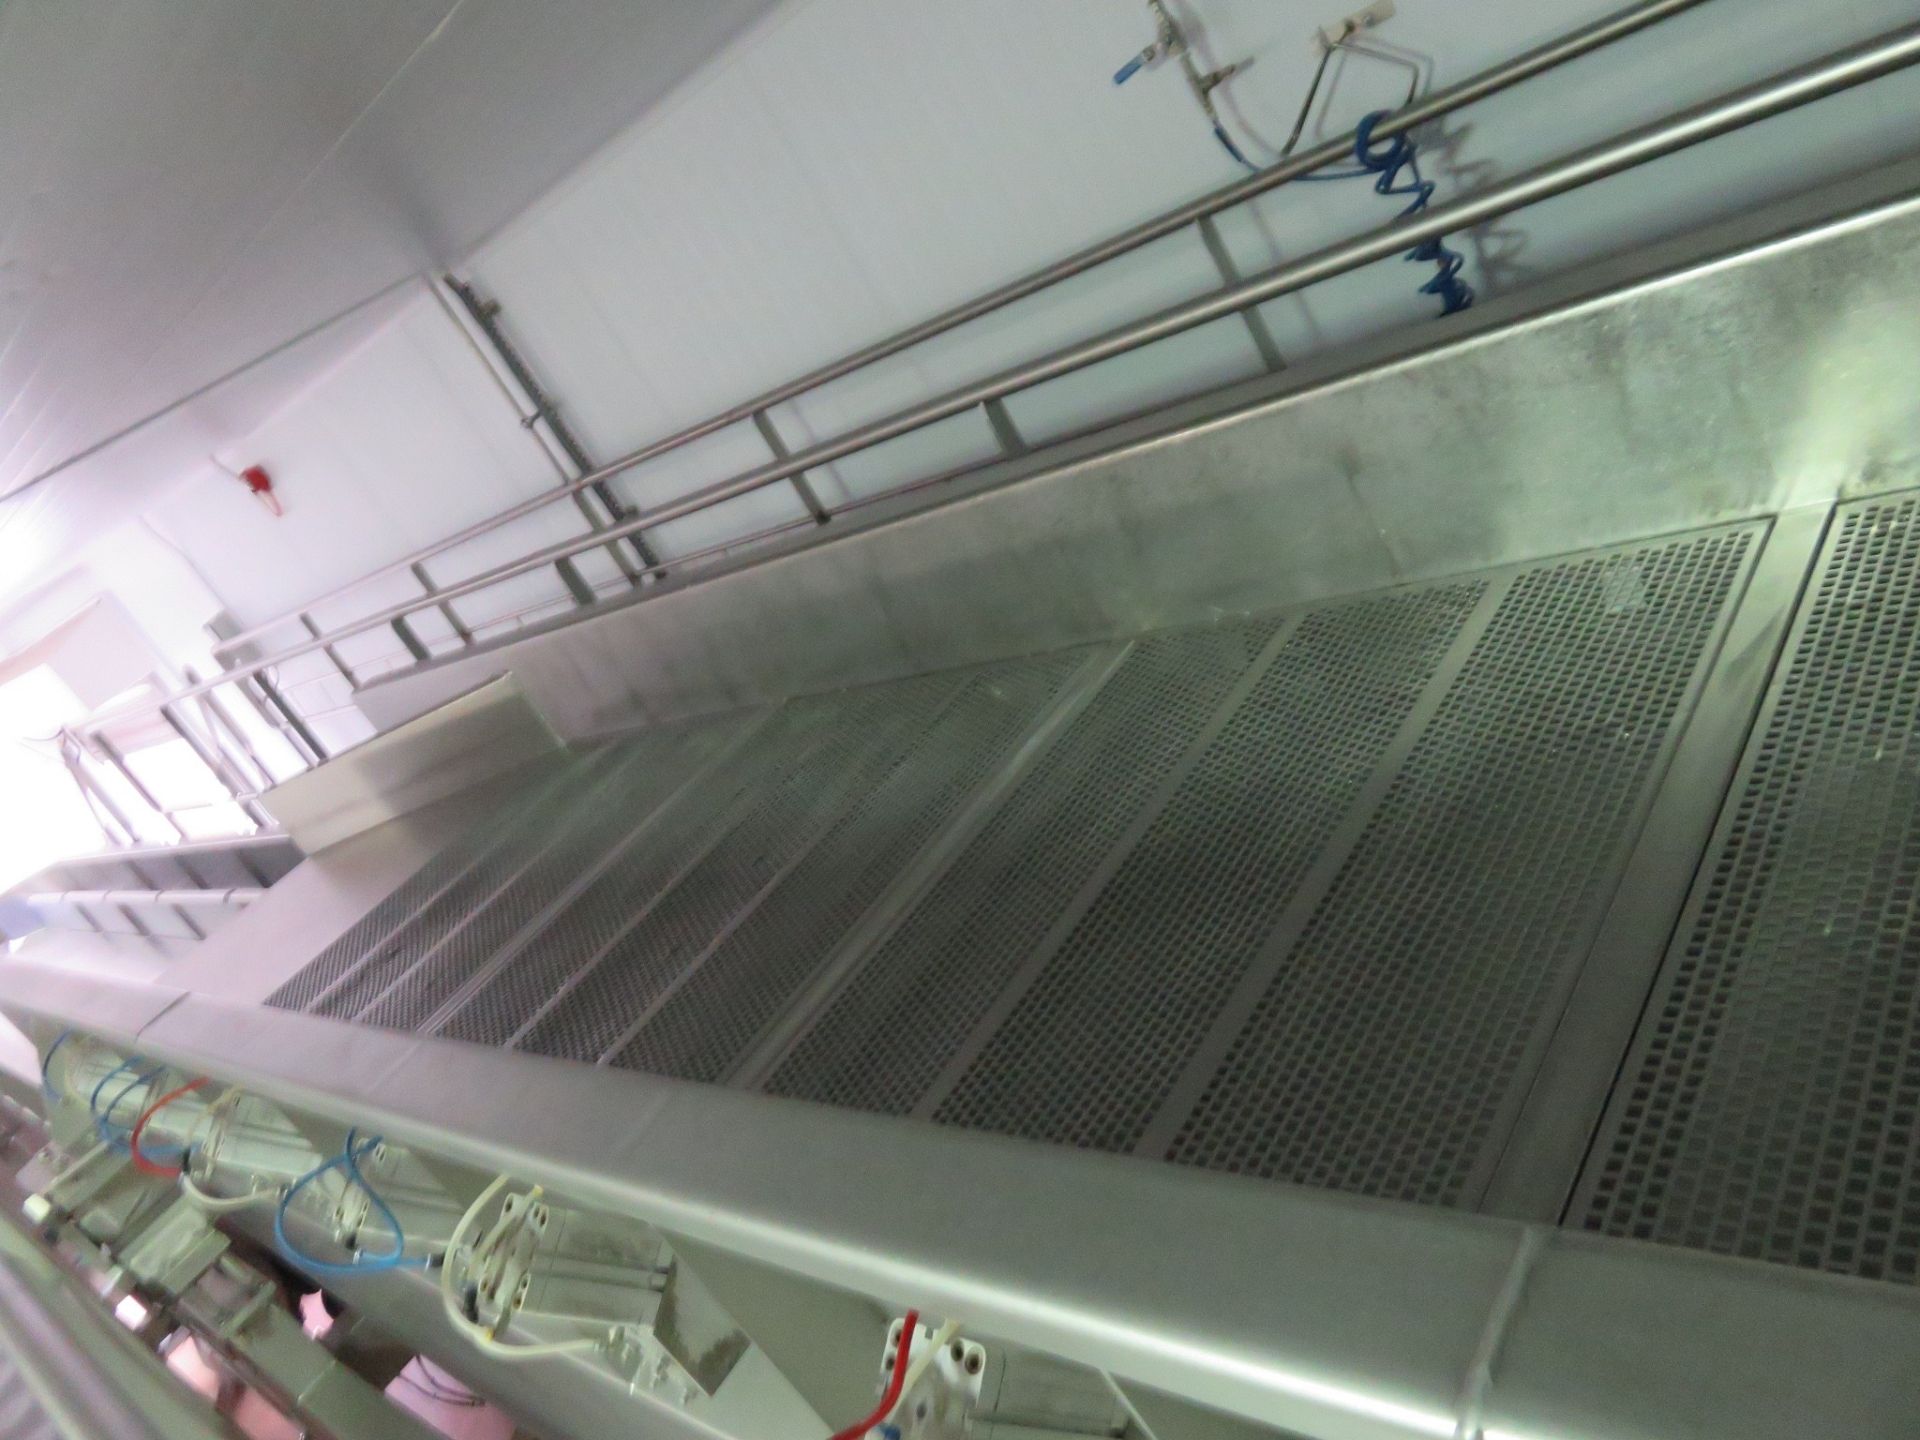 De-husking System by VTP (Vibtech Processing) (1) 5.5 meter long x 1 meter wide. Lift Out £780 - Image 3 of 18